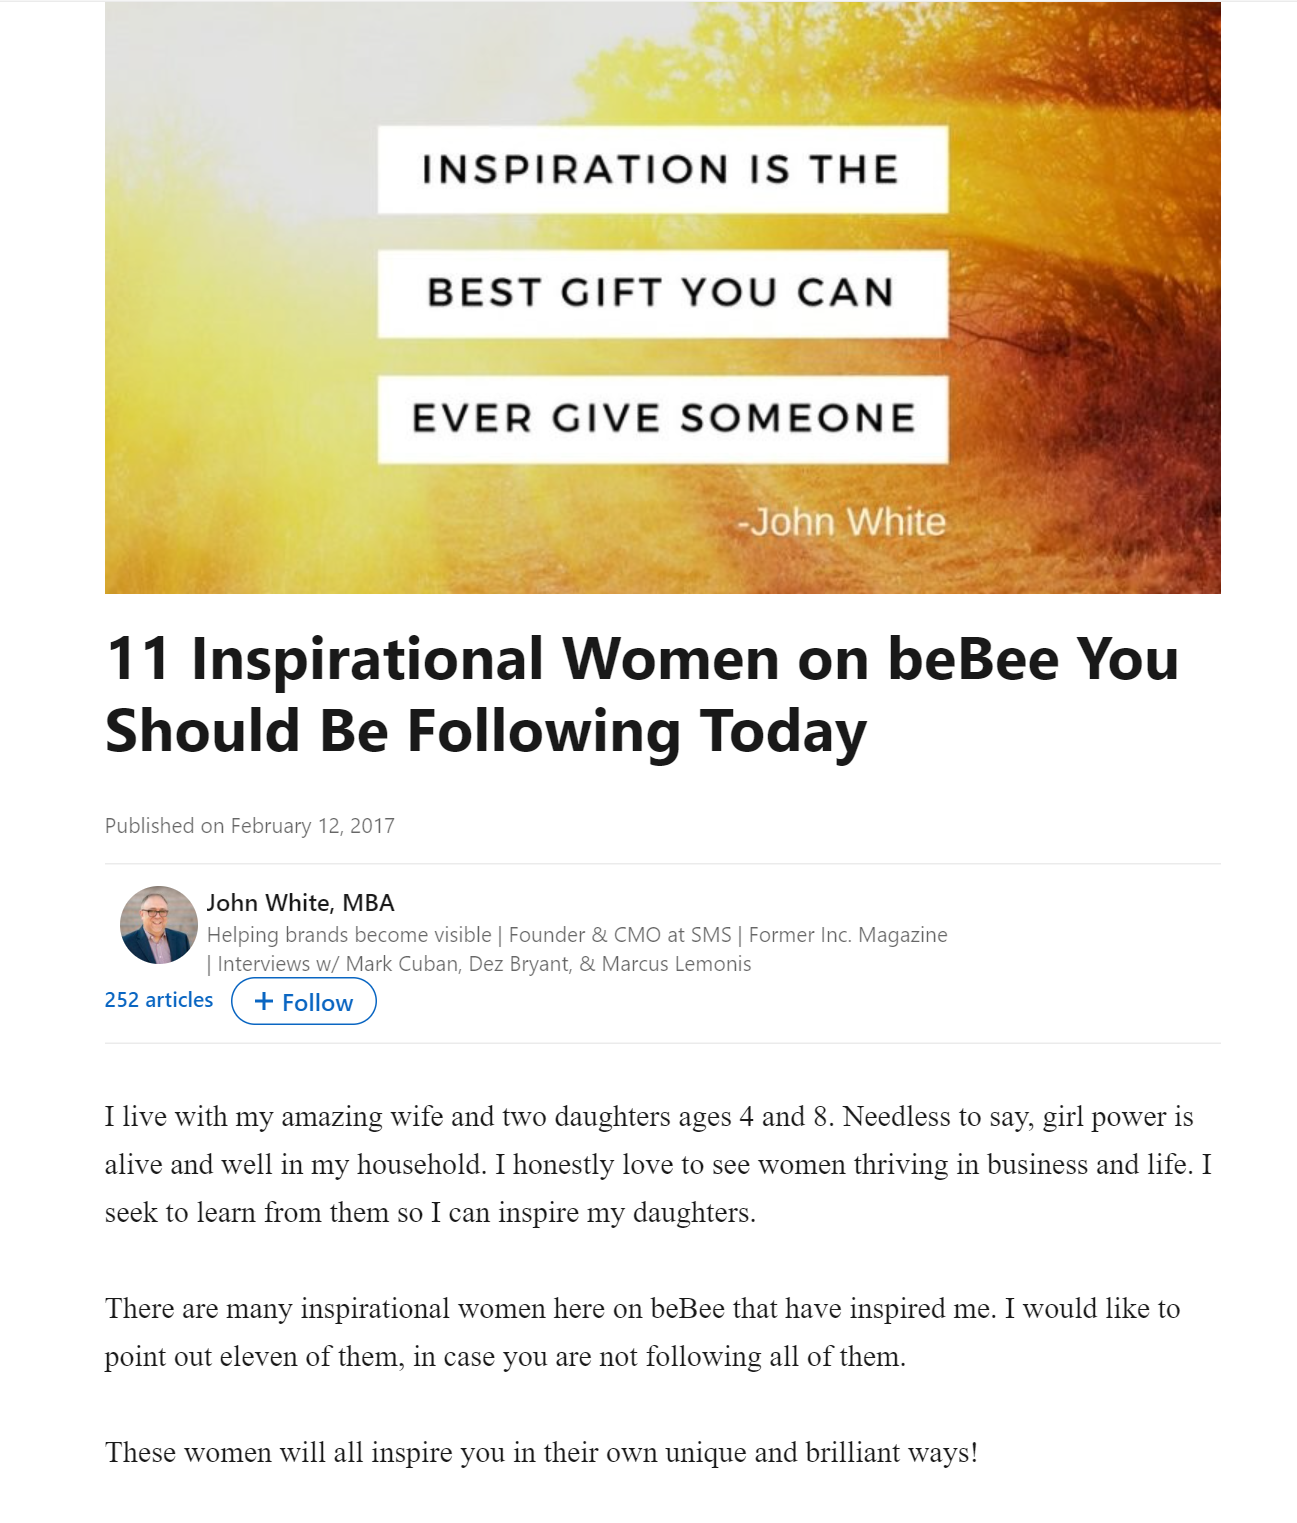 11 Inspirational Women on beBee You
Should Be Following Today

Published on February 12, 2017

John White, MBA
Helpin visible der & CMO at SMS | Former Inc Magazine
int an, Dez Bry Lemon

252 articles (+ Follow

 
 

I live with my amazing wife and two daughters ages 4 and 8. Needless to say, girl power is
alive and well in my household. I honestly love to see women thriving in business and life. |

seek to learn from them so I can inspire my daughters.

There are many inspirational women here on beBee that have inspired me. I would like to

point out eleven of them, in case you are not following all of them.

These women will all inspire you in their own unique and brilliant ways!